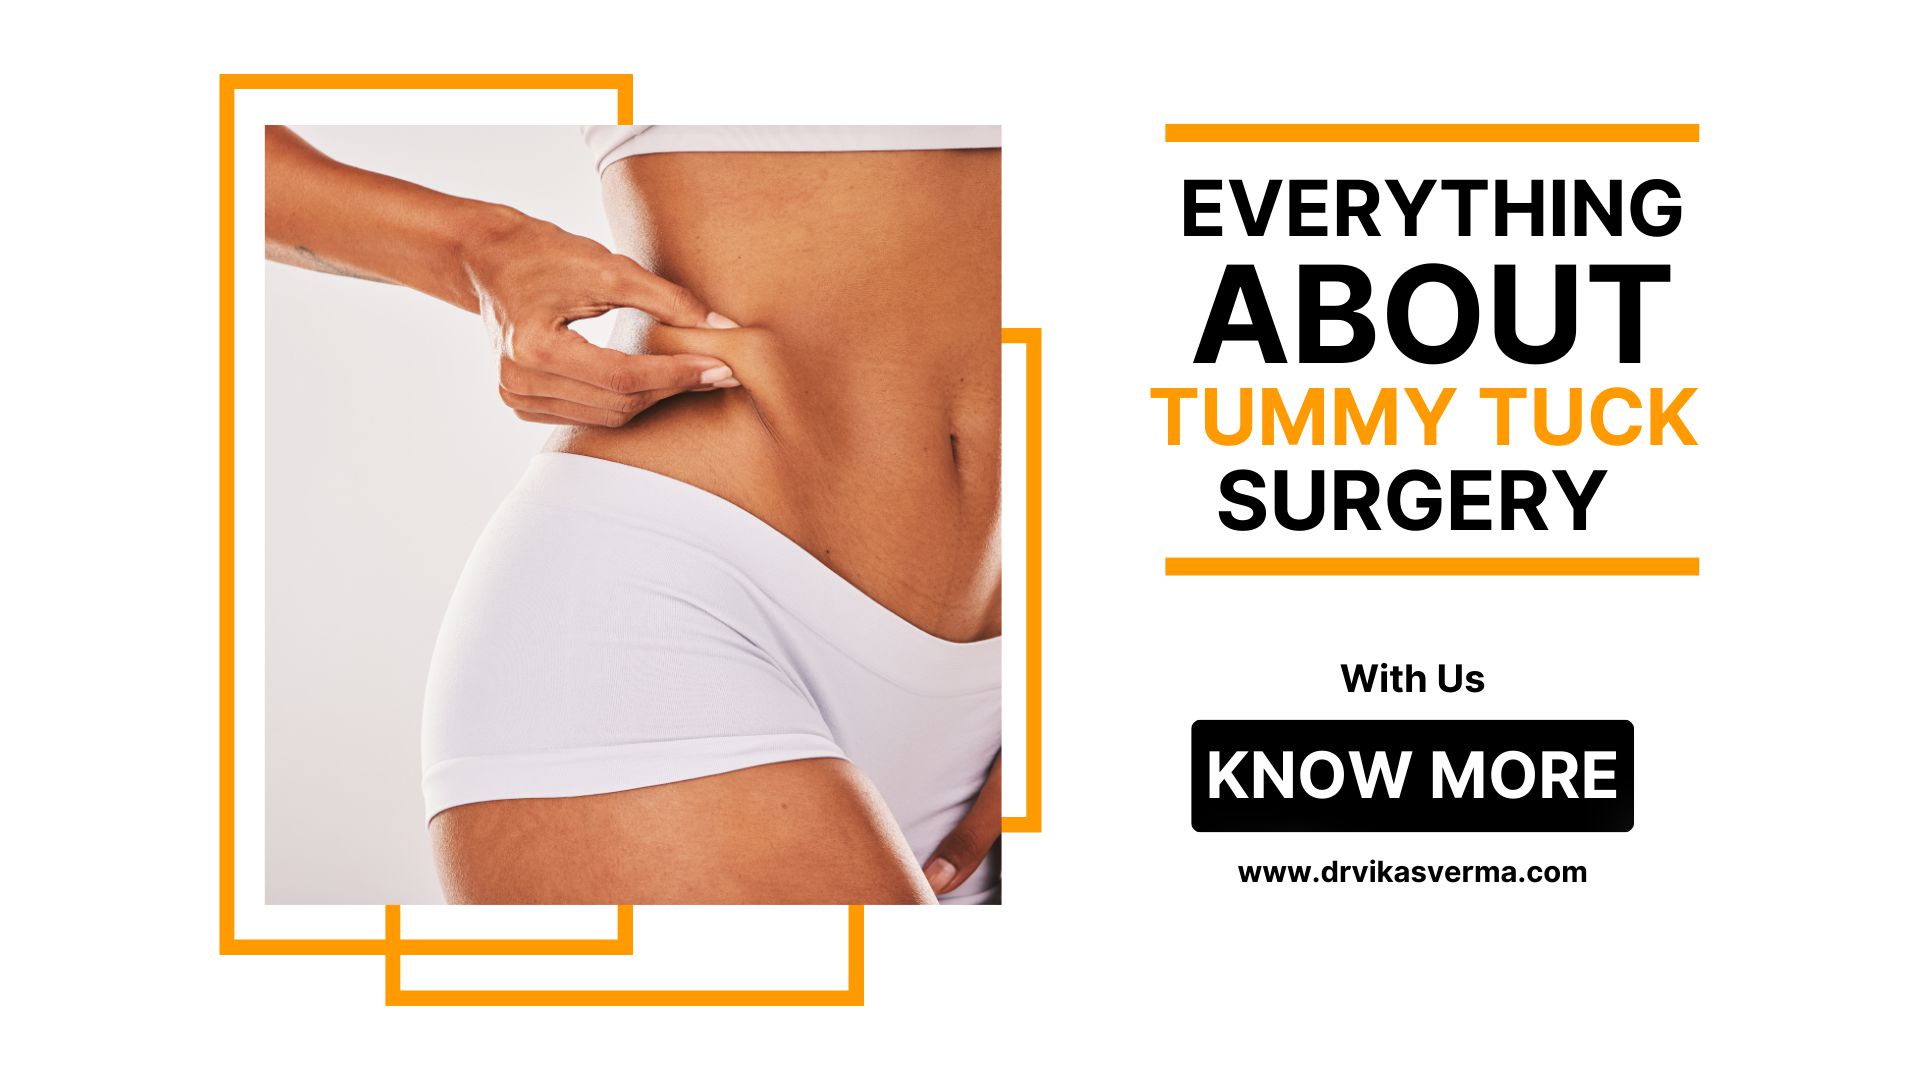 Everything You Need to Know About Tummy Tuck